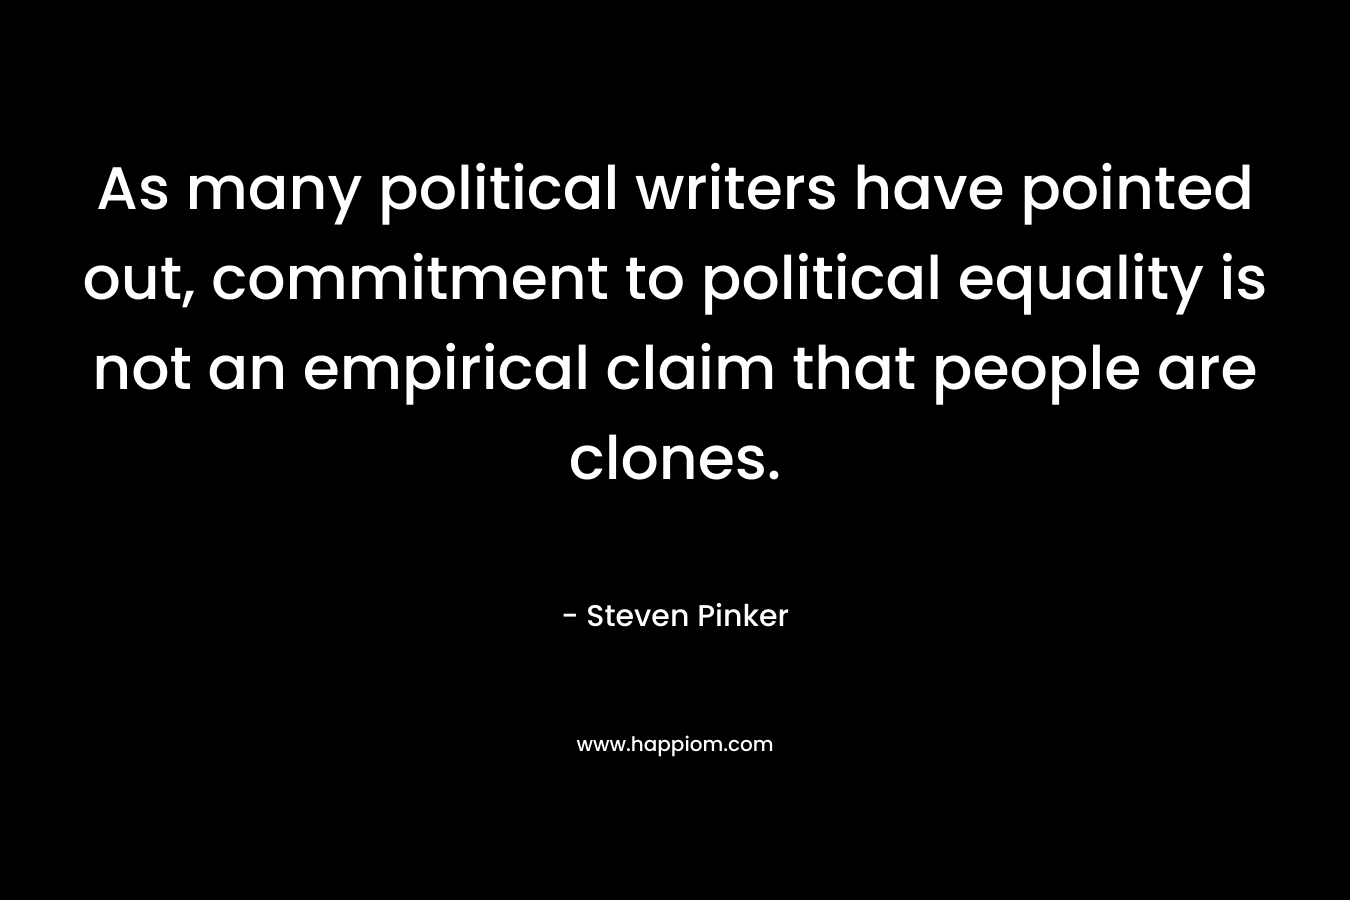 As many political writers have pointed out, commitment to political equality is not an empirical claim that people are clones. – Steven Pinker